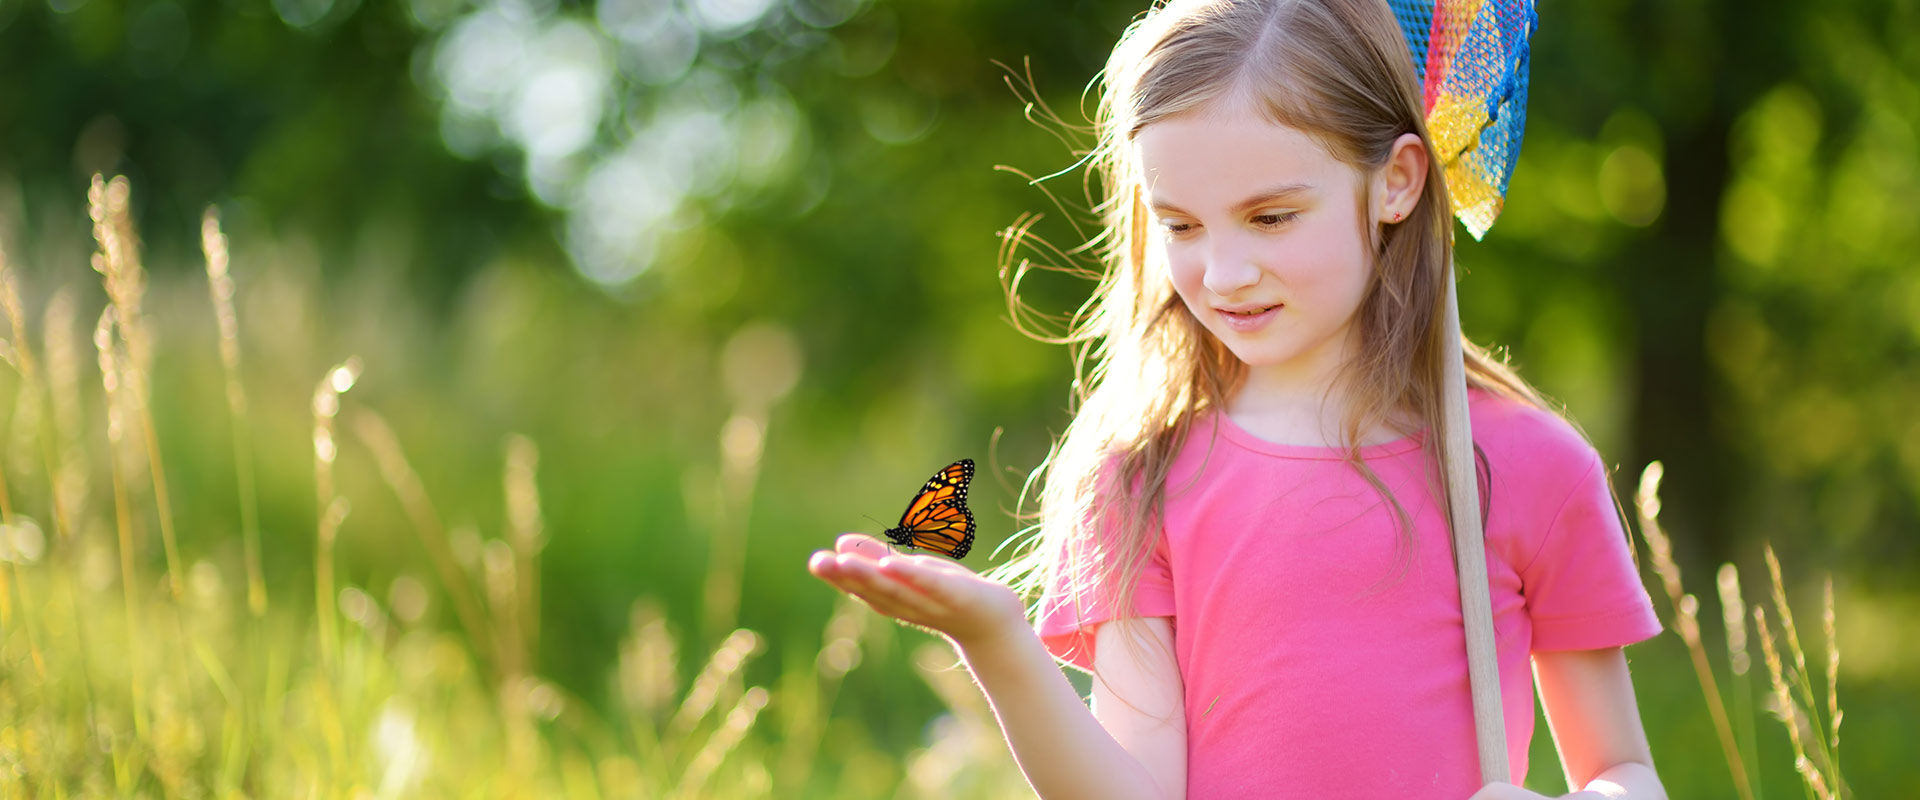 Young girl at forest's edge with a monarch butterfly resting on her outstretched hand at nature school